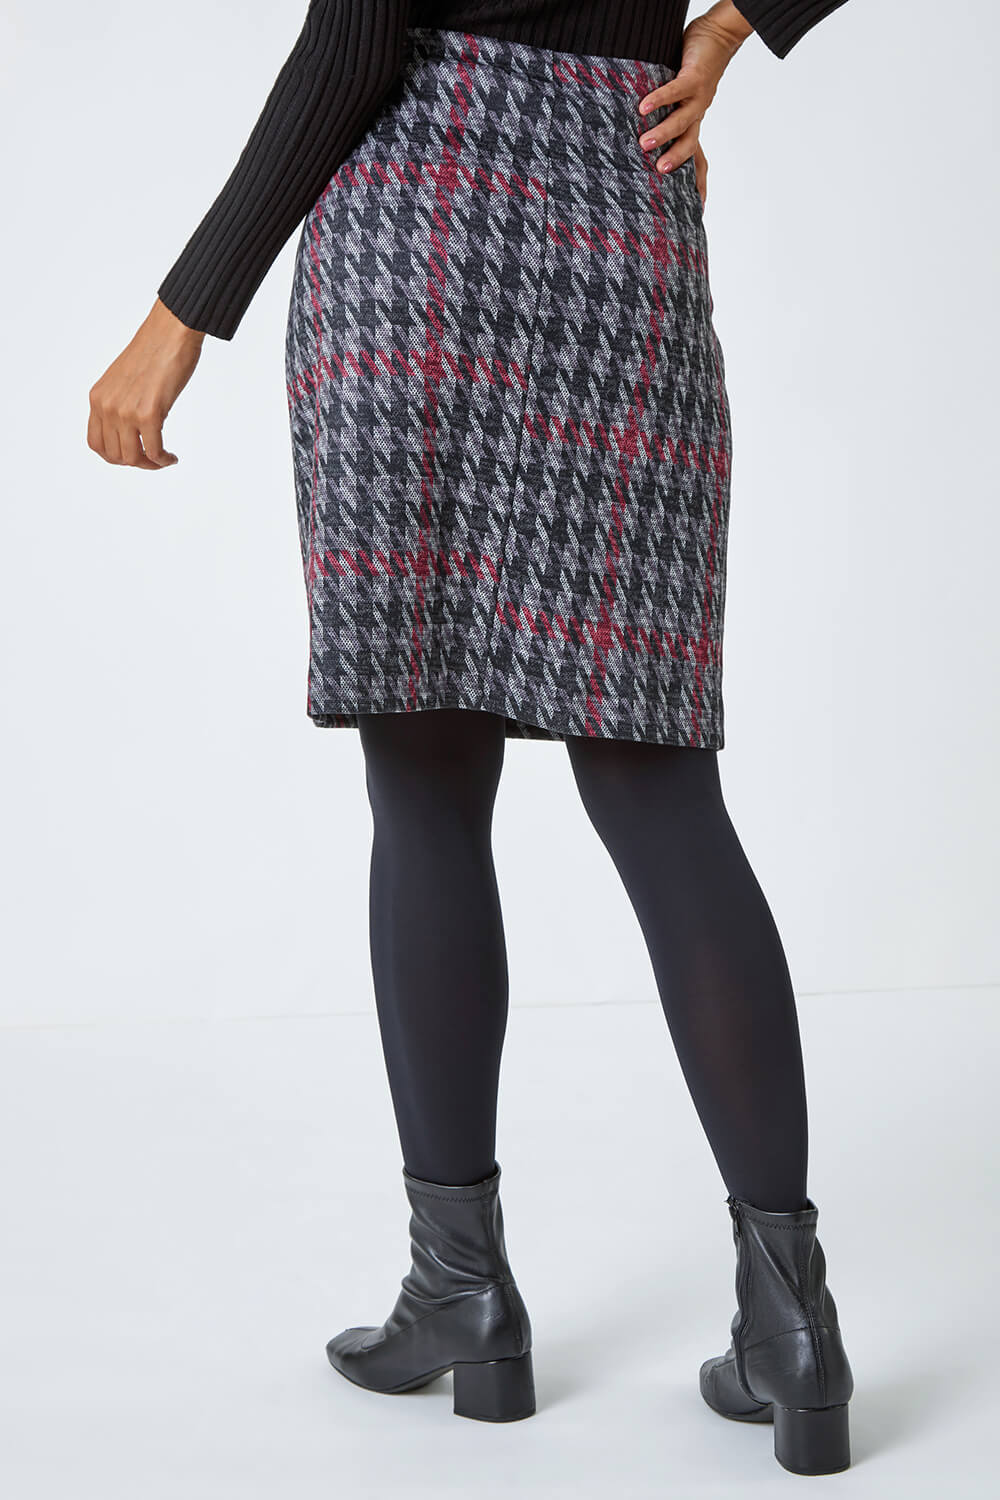 Red Houndstooth Stretch Pencil Skirt, Image 3 of 5